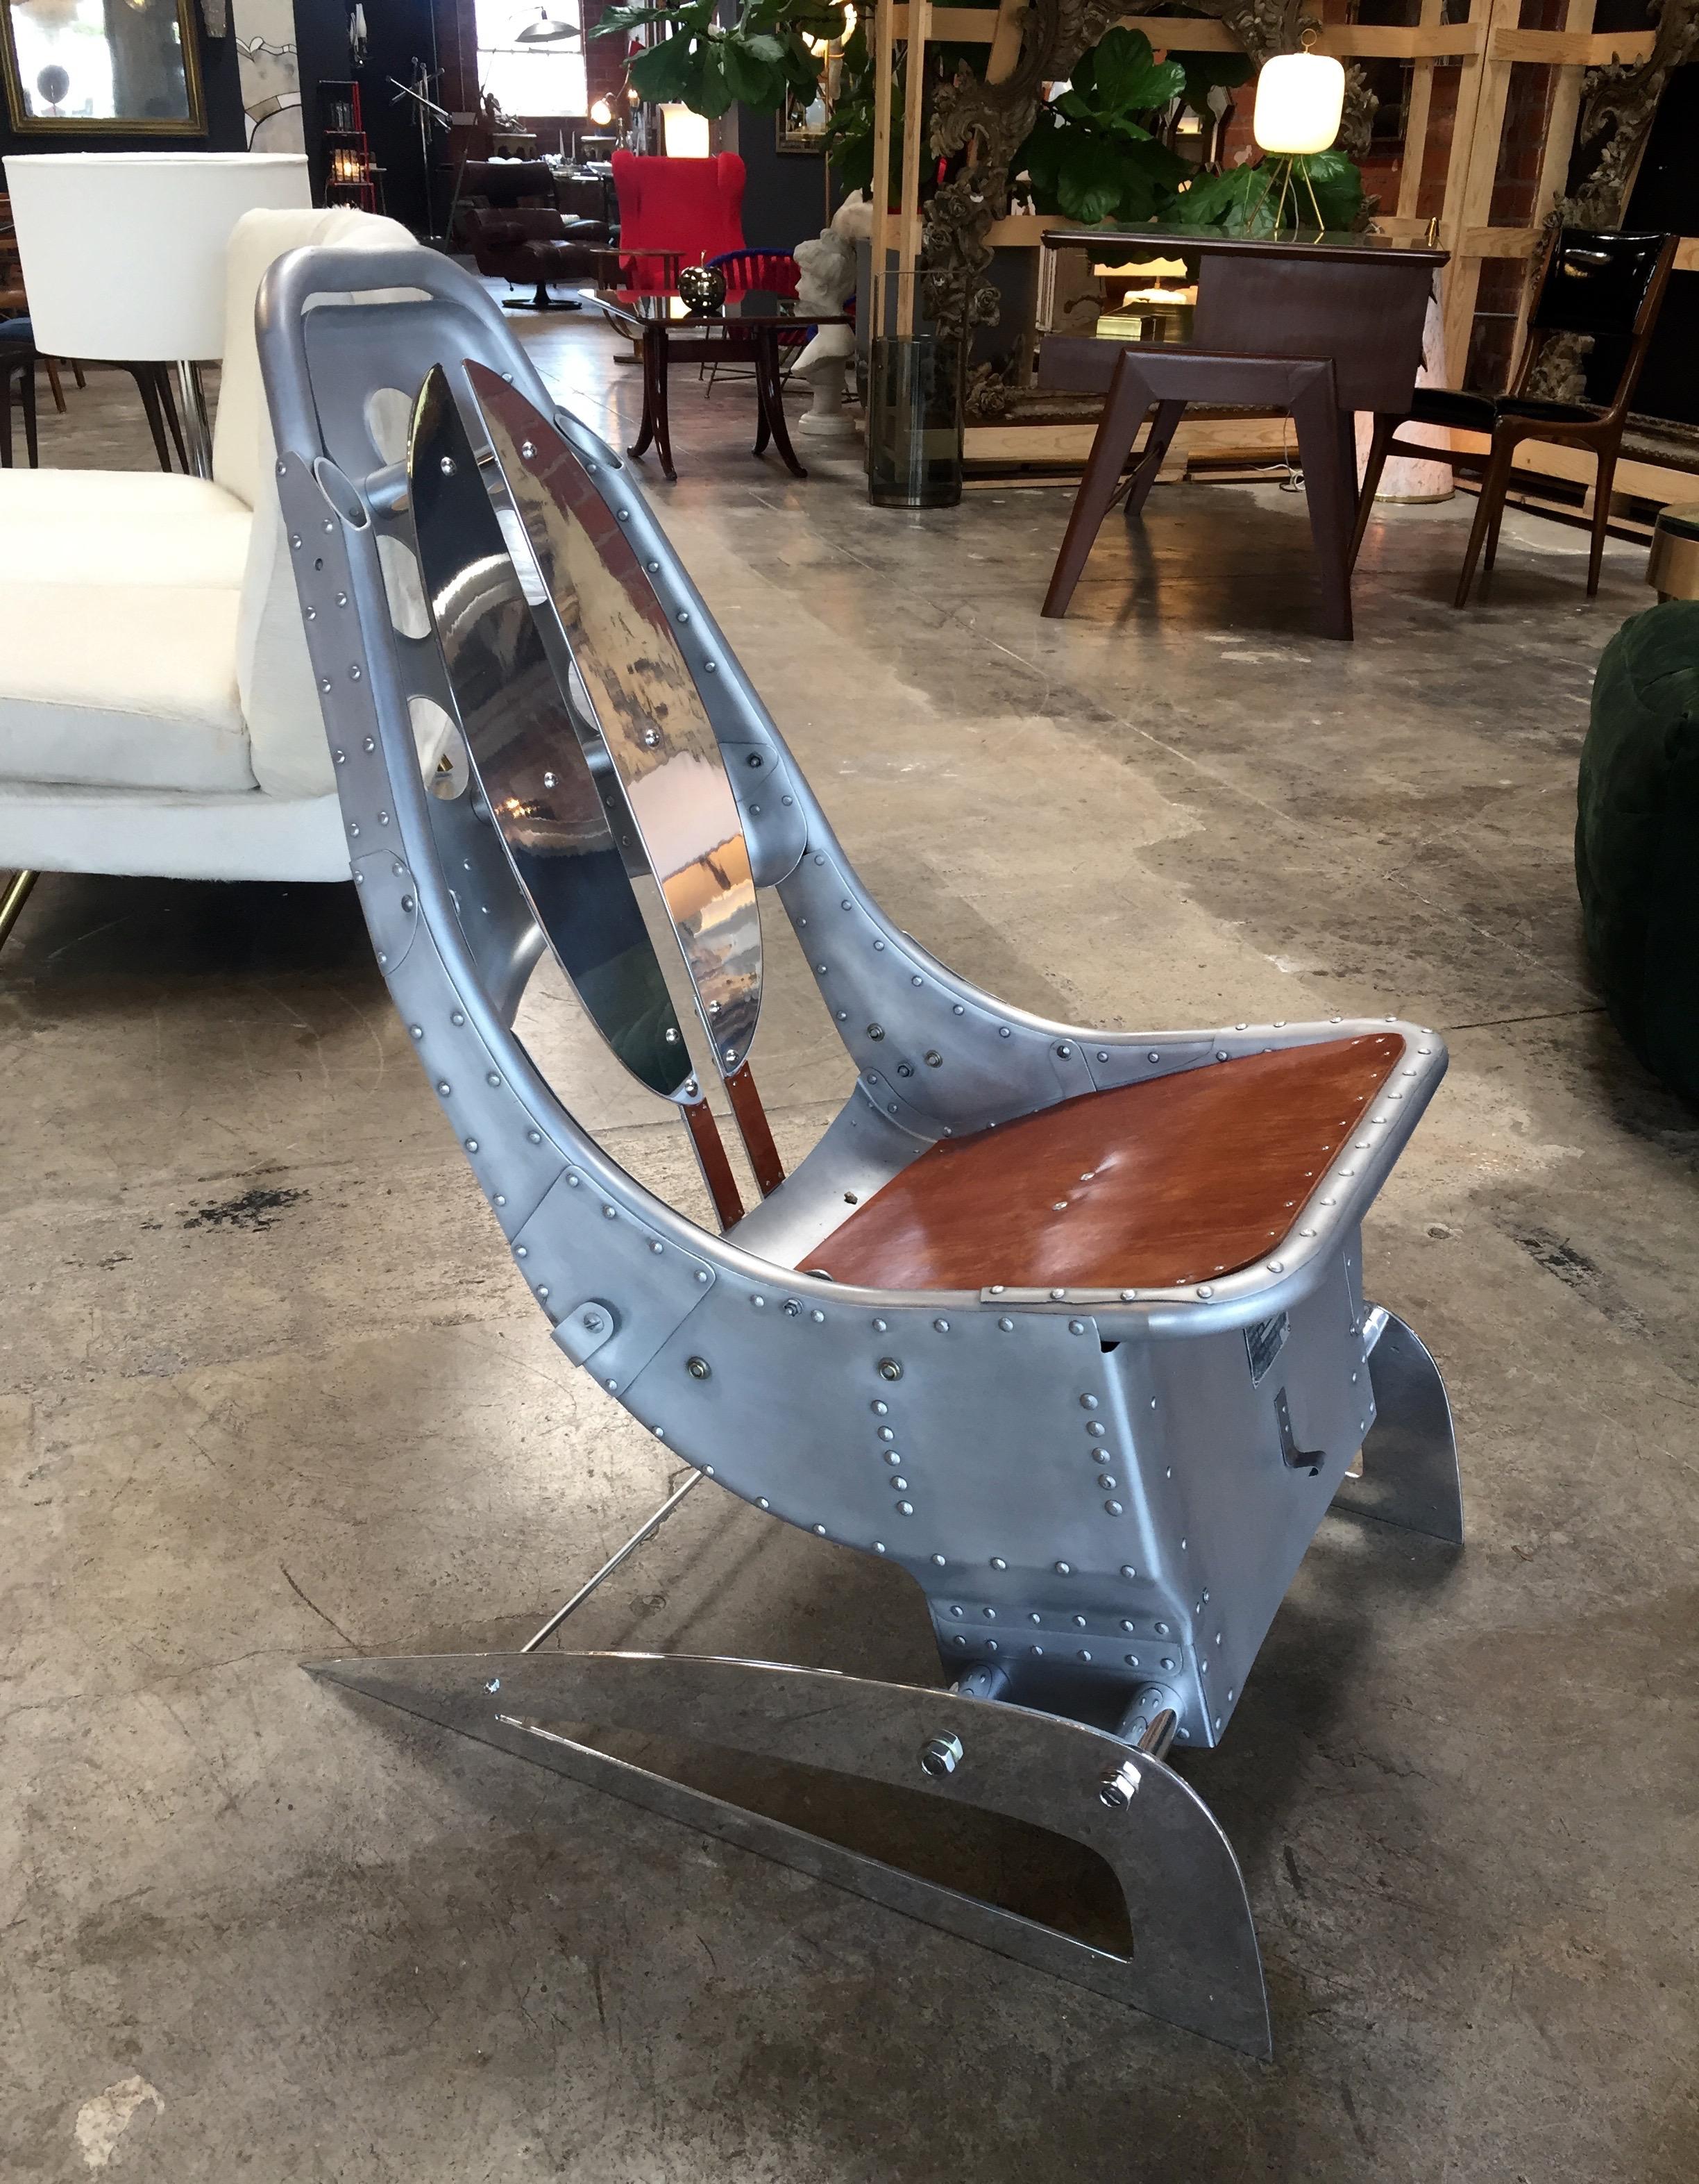 For your consideration a vintage aluminum airplane chair. Seat in wood.
Original vintage condition. Patina, scuffs, and scratches present.